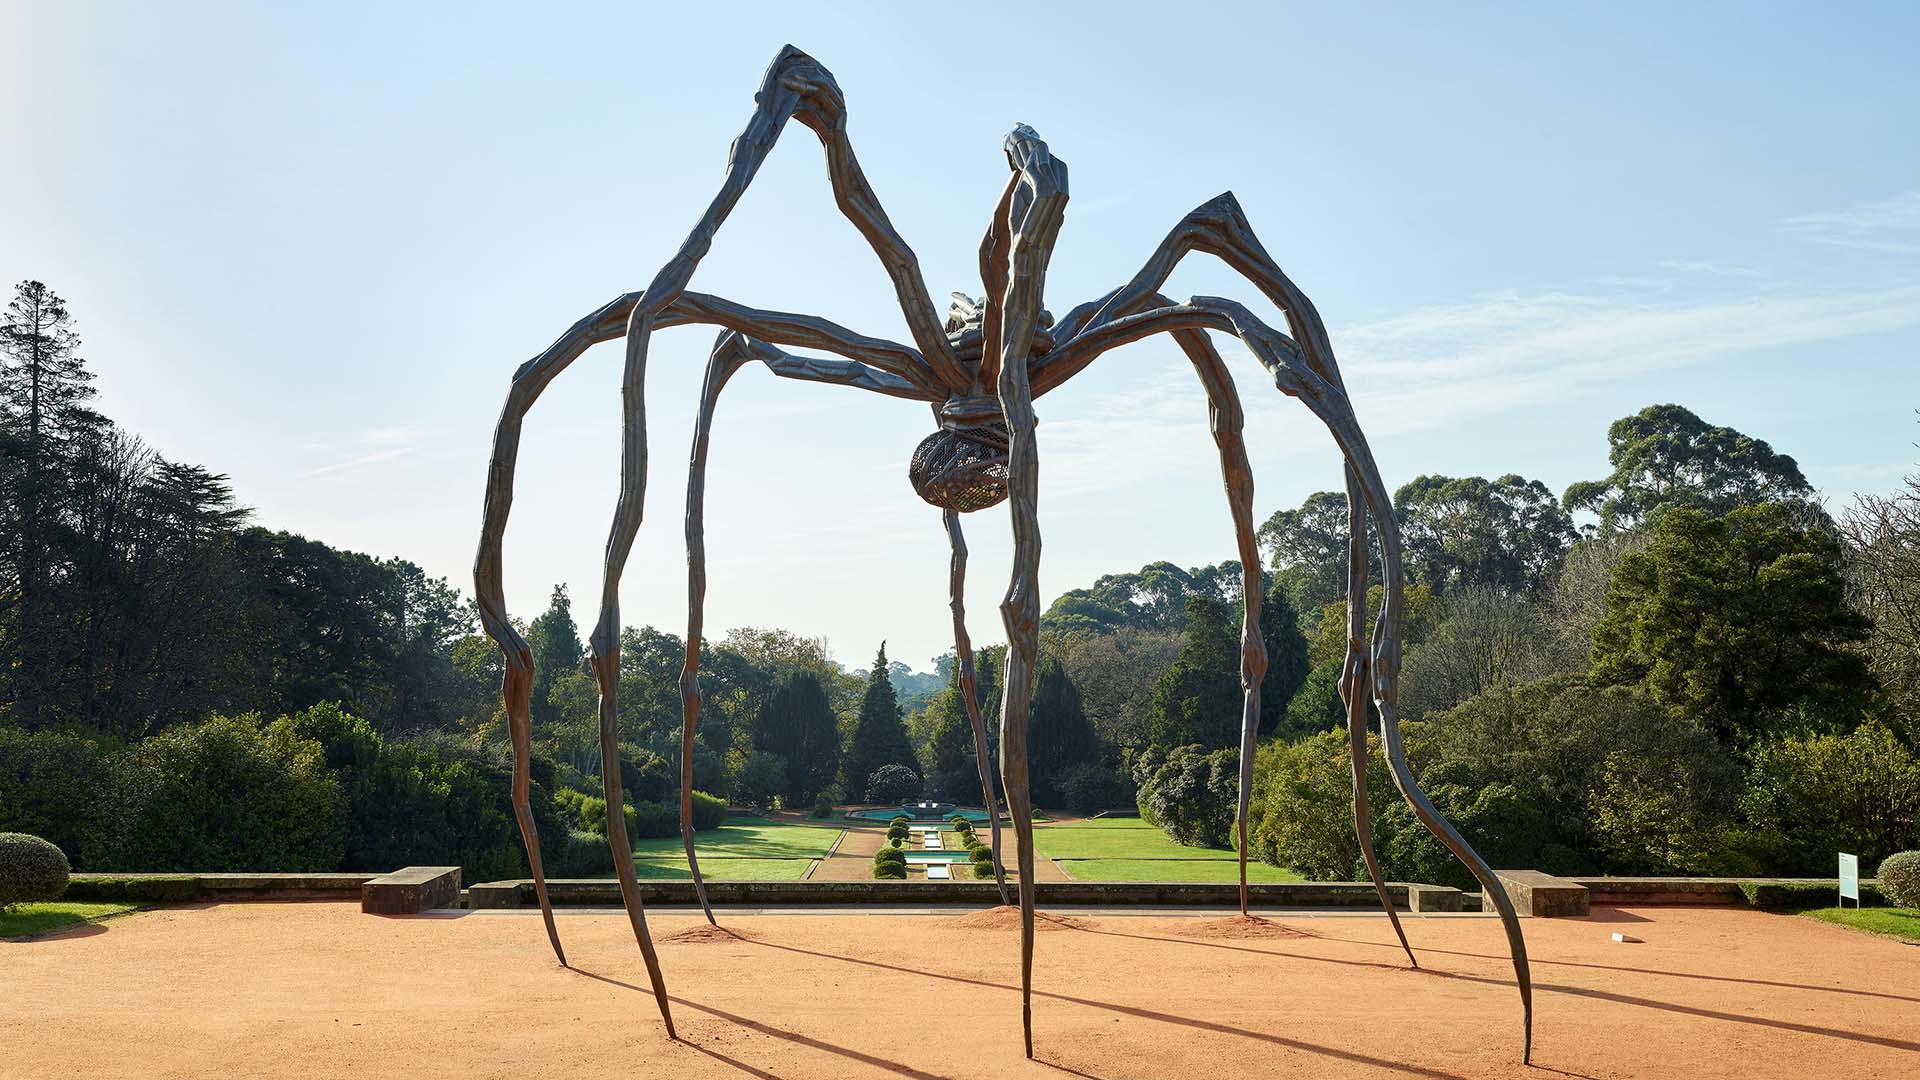 Louise Bourgeois' World-Famous Spider Sculpture 'Maman' Is Coming to Australia for the First Time